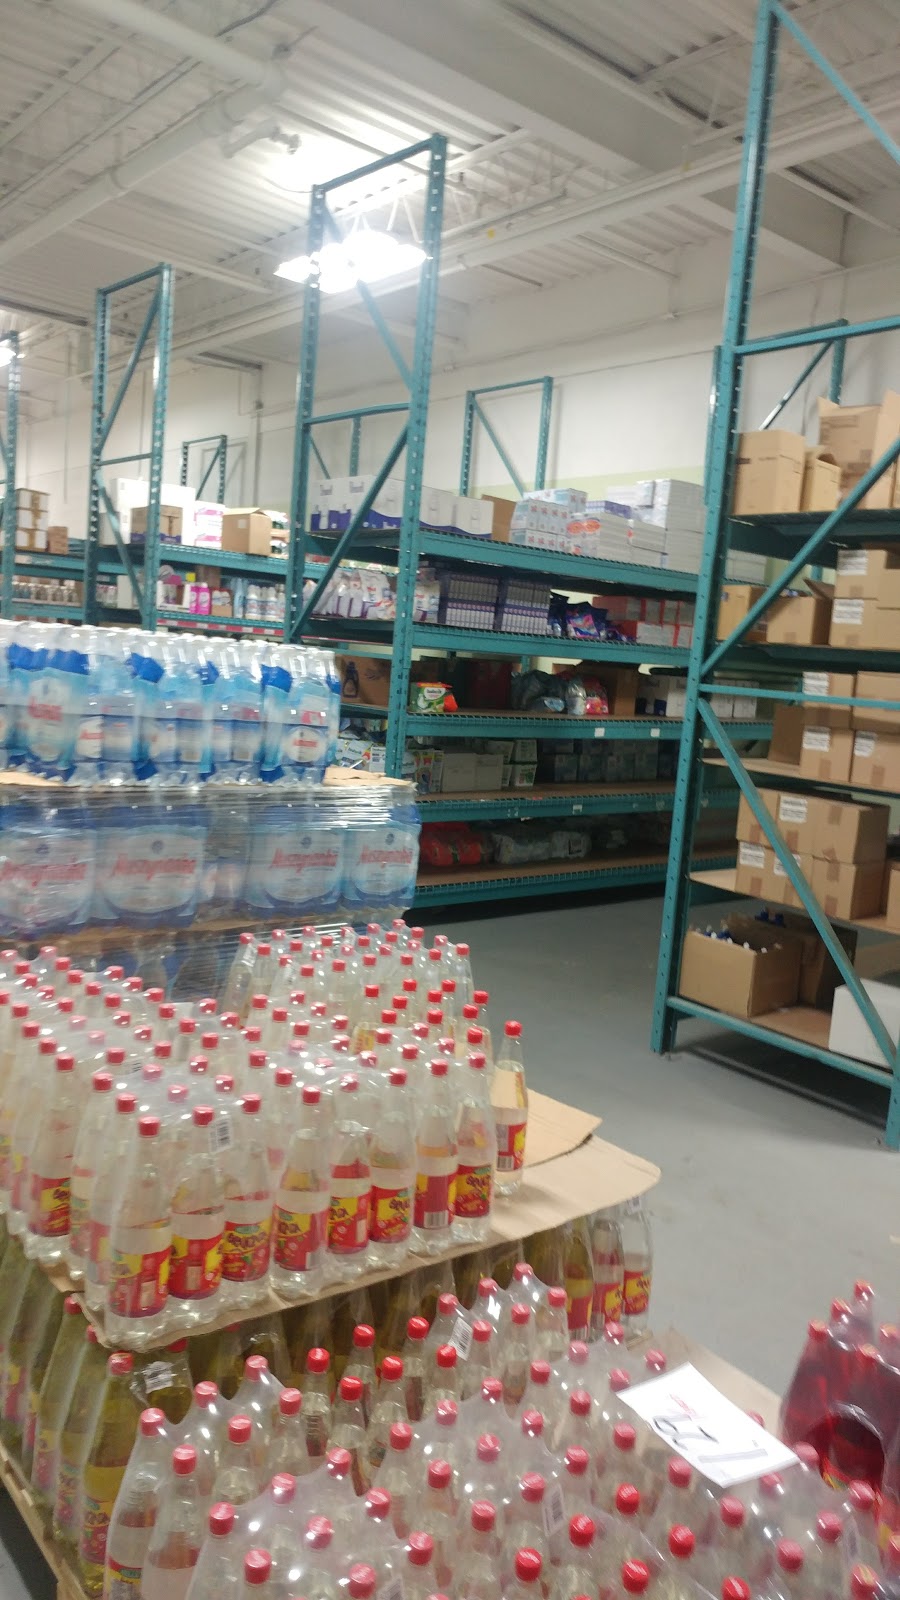 Miami Wholesale Foods | store | 2453 Dixie Rd, Mississauga, ON L4Y 2A1, Canada | 2892327560 OR +1 289-232-7560